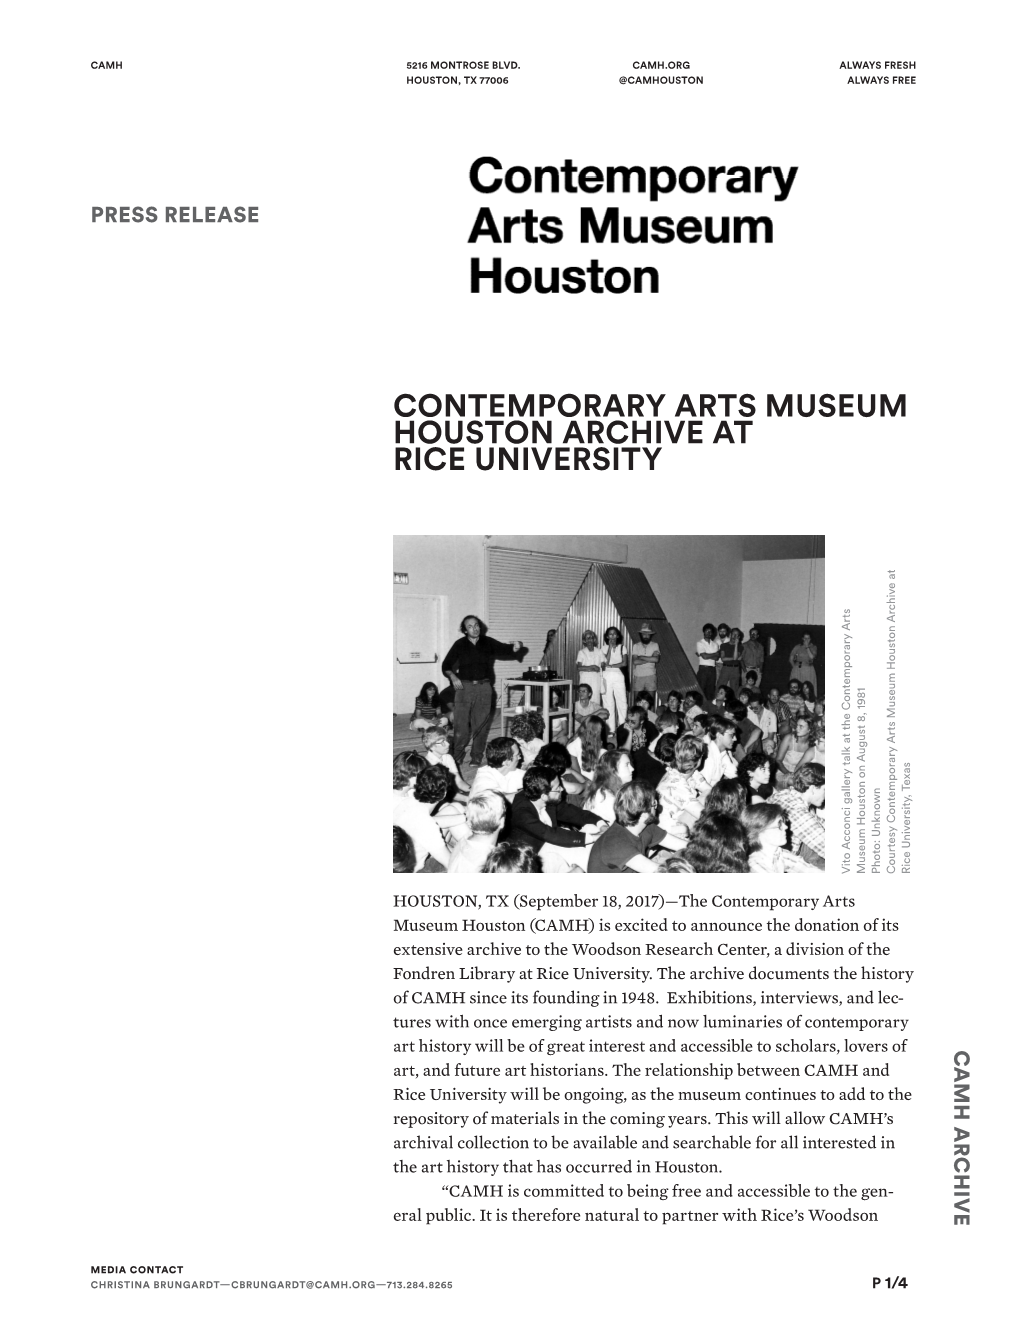 Contemporary Arts Museum Houston Archive at Rice University